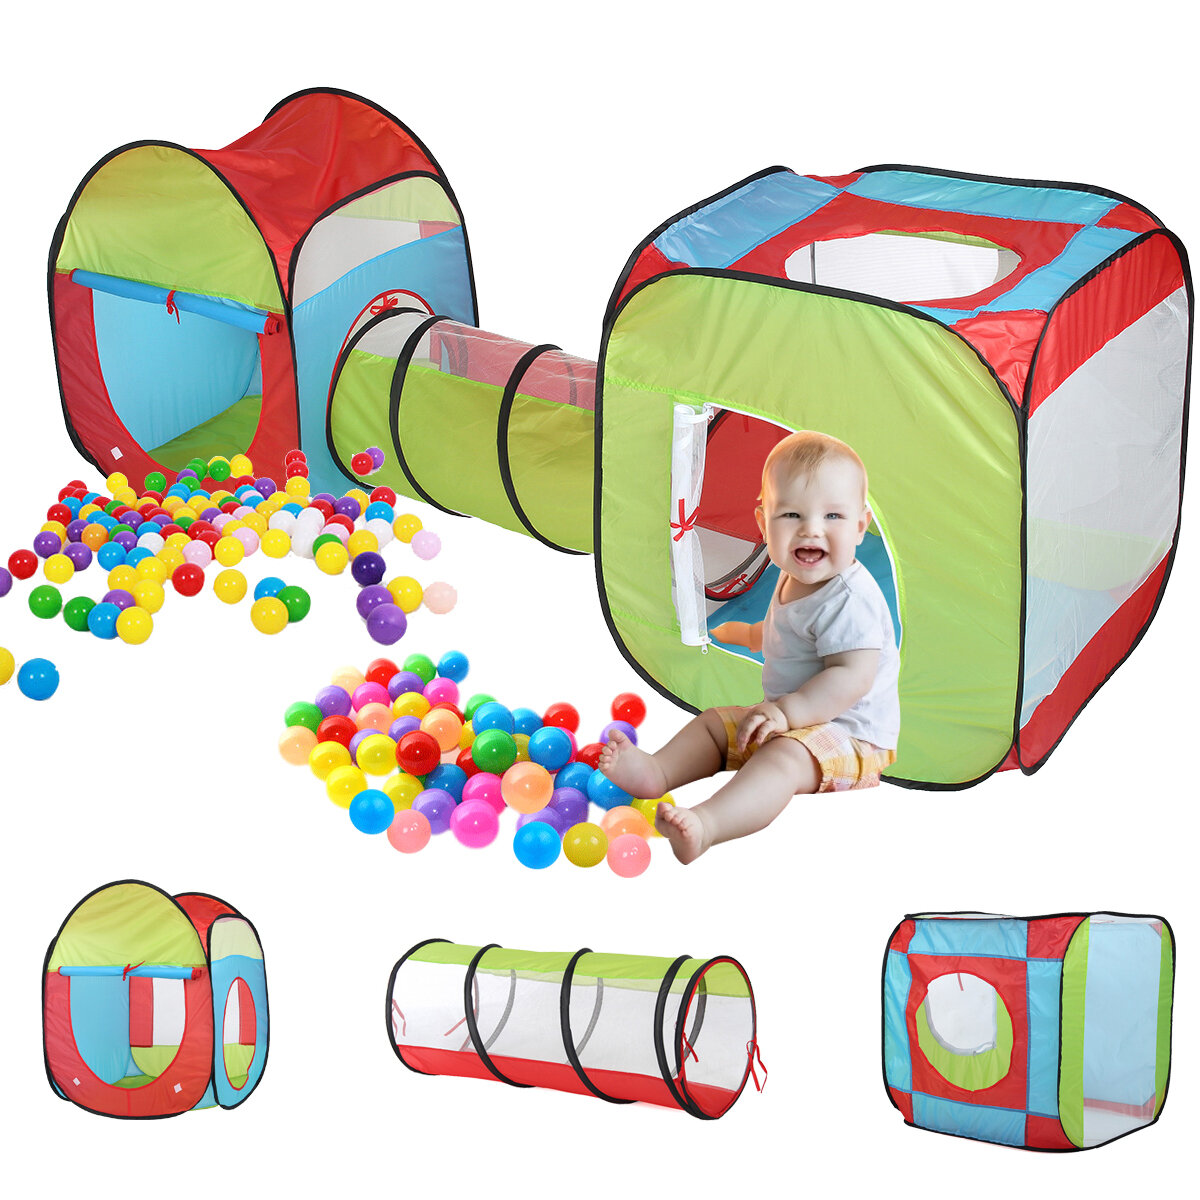 Image of Portable 3 in 1 Childrens Baby Kids Play Tent Toddlers Tunnel Ball Pit Set Children Baby Cubby Playhouse